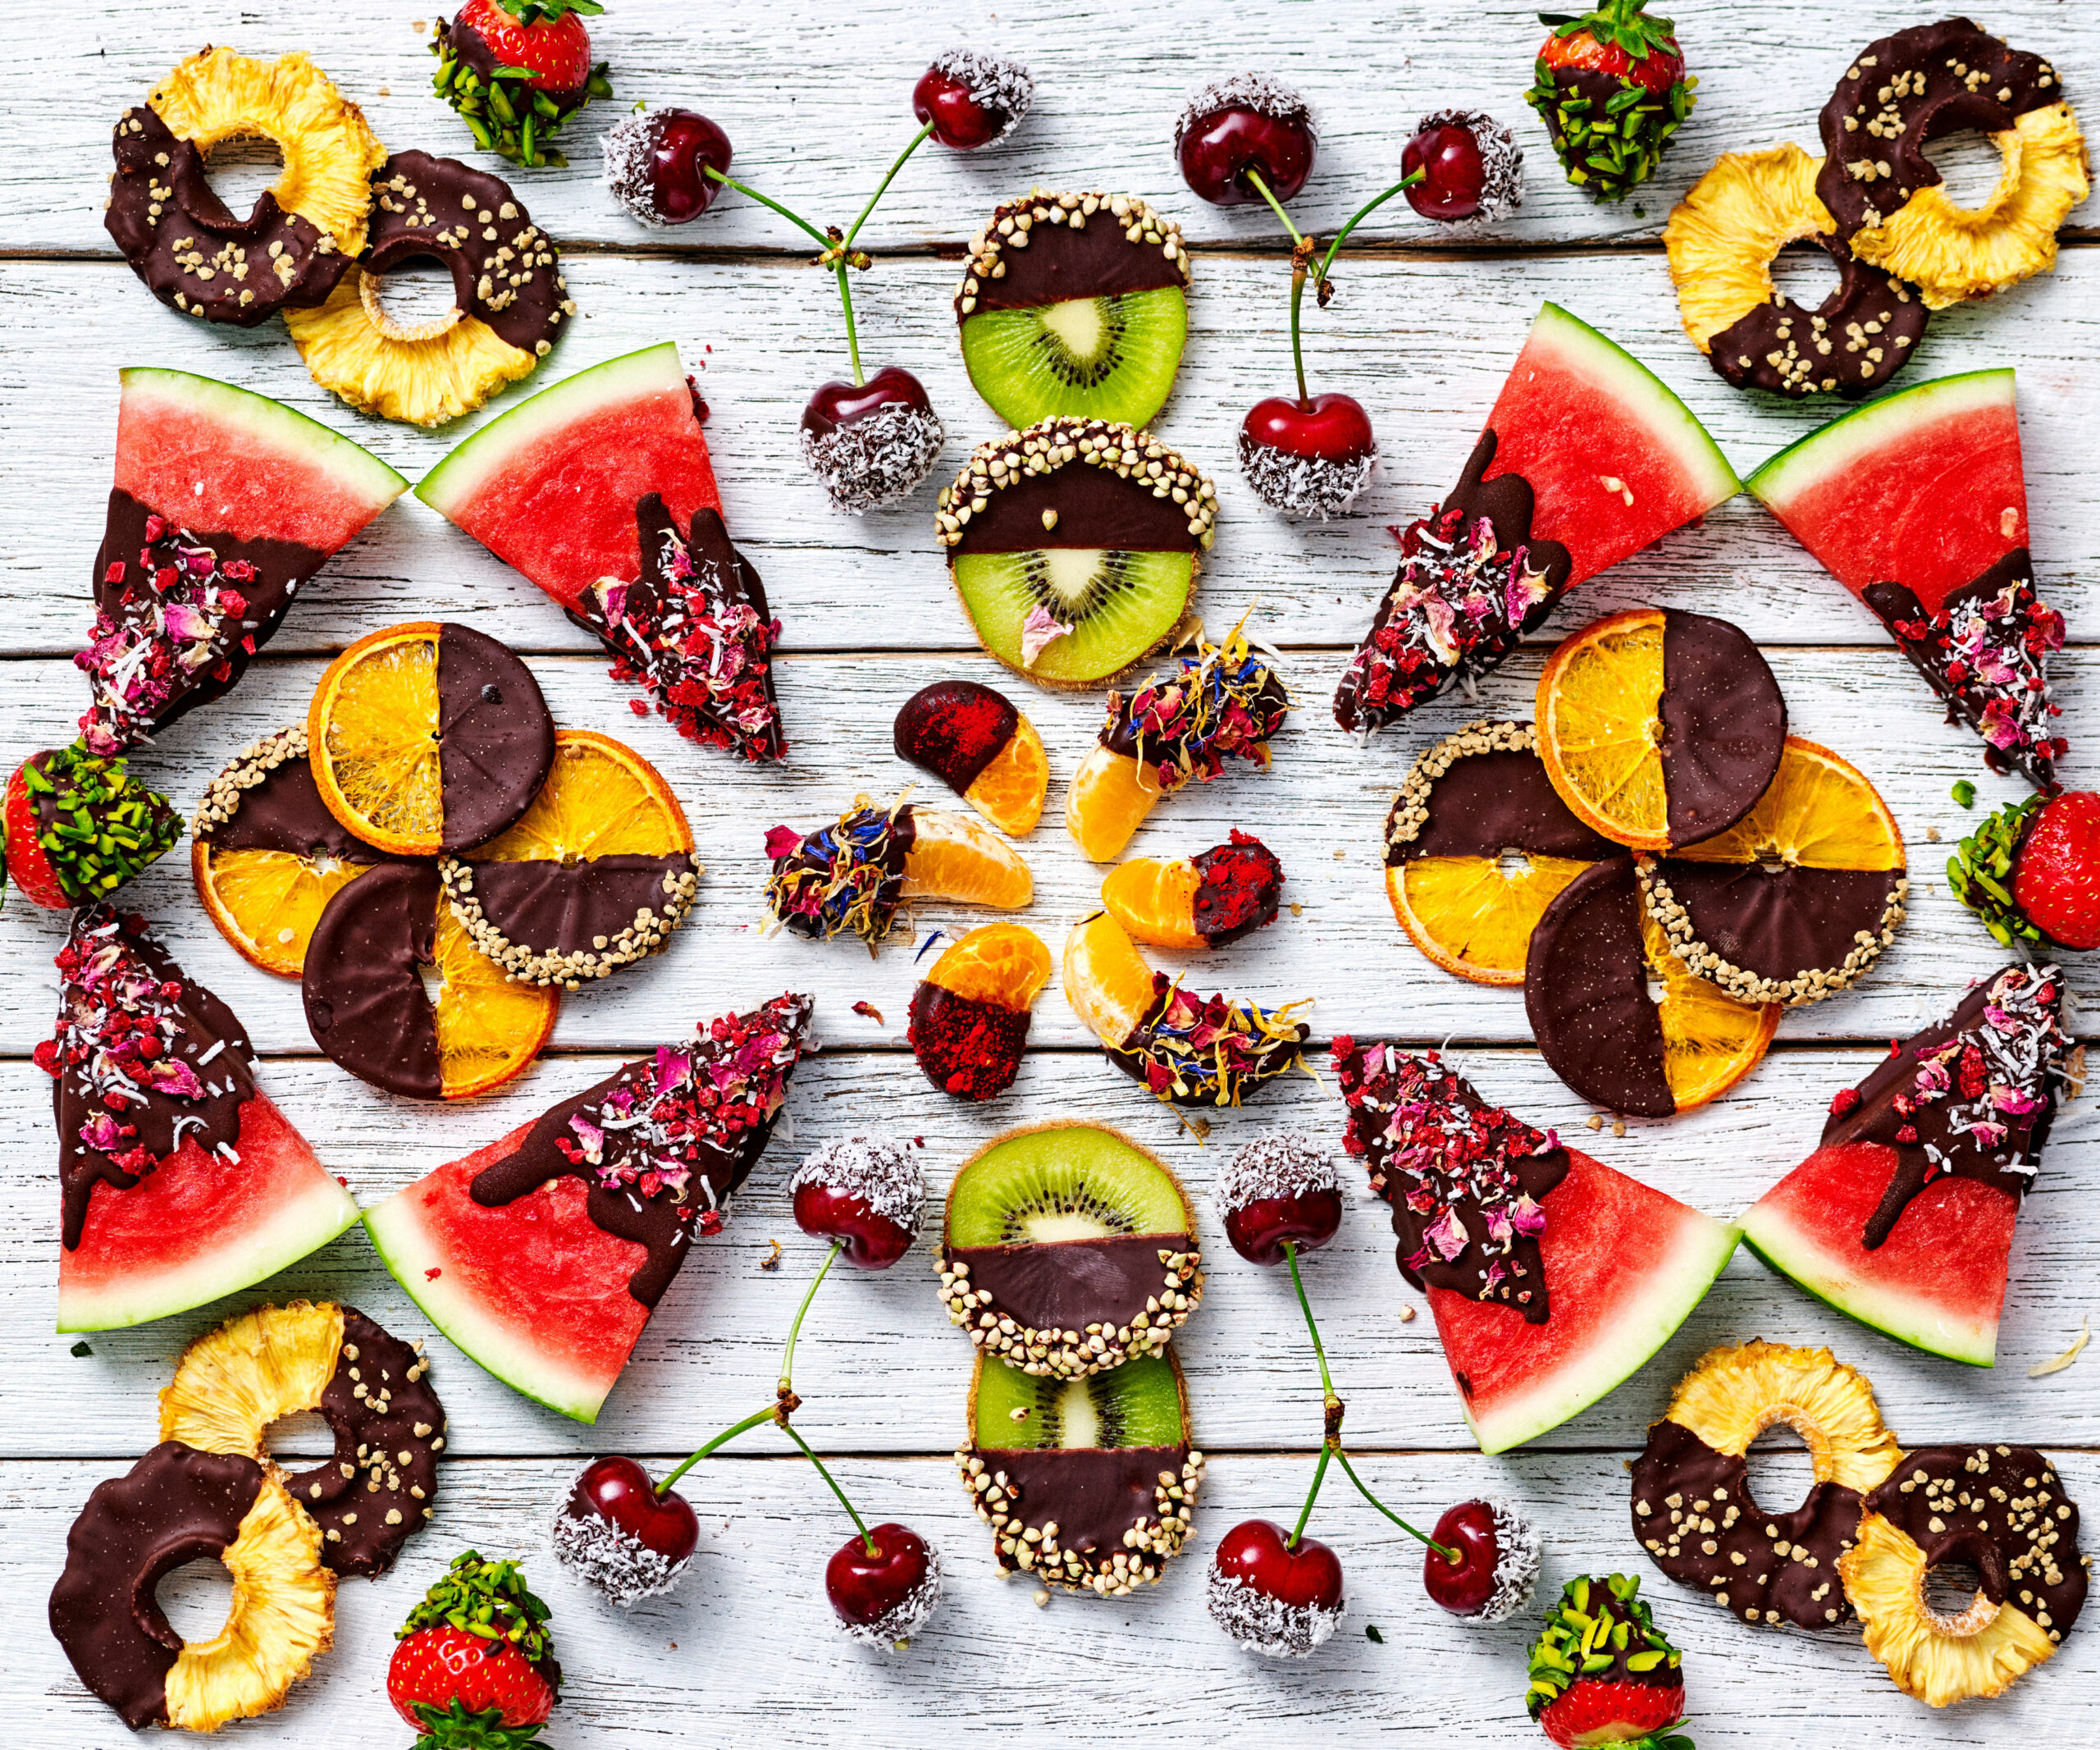 A variety of tropical fruits dipped in chocolate and toppings.